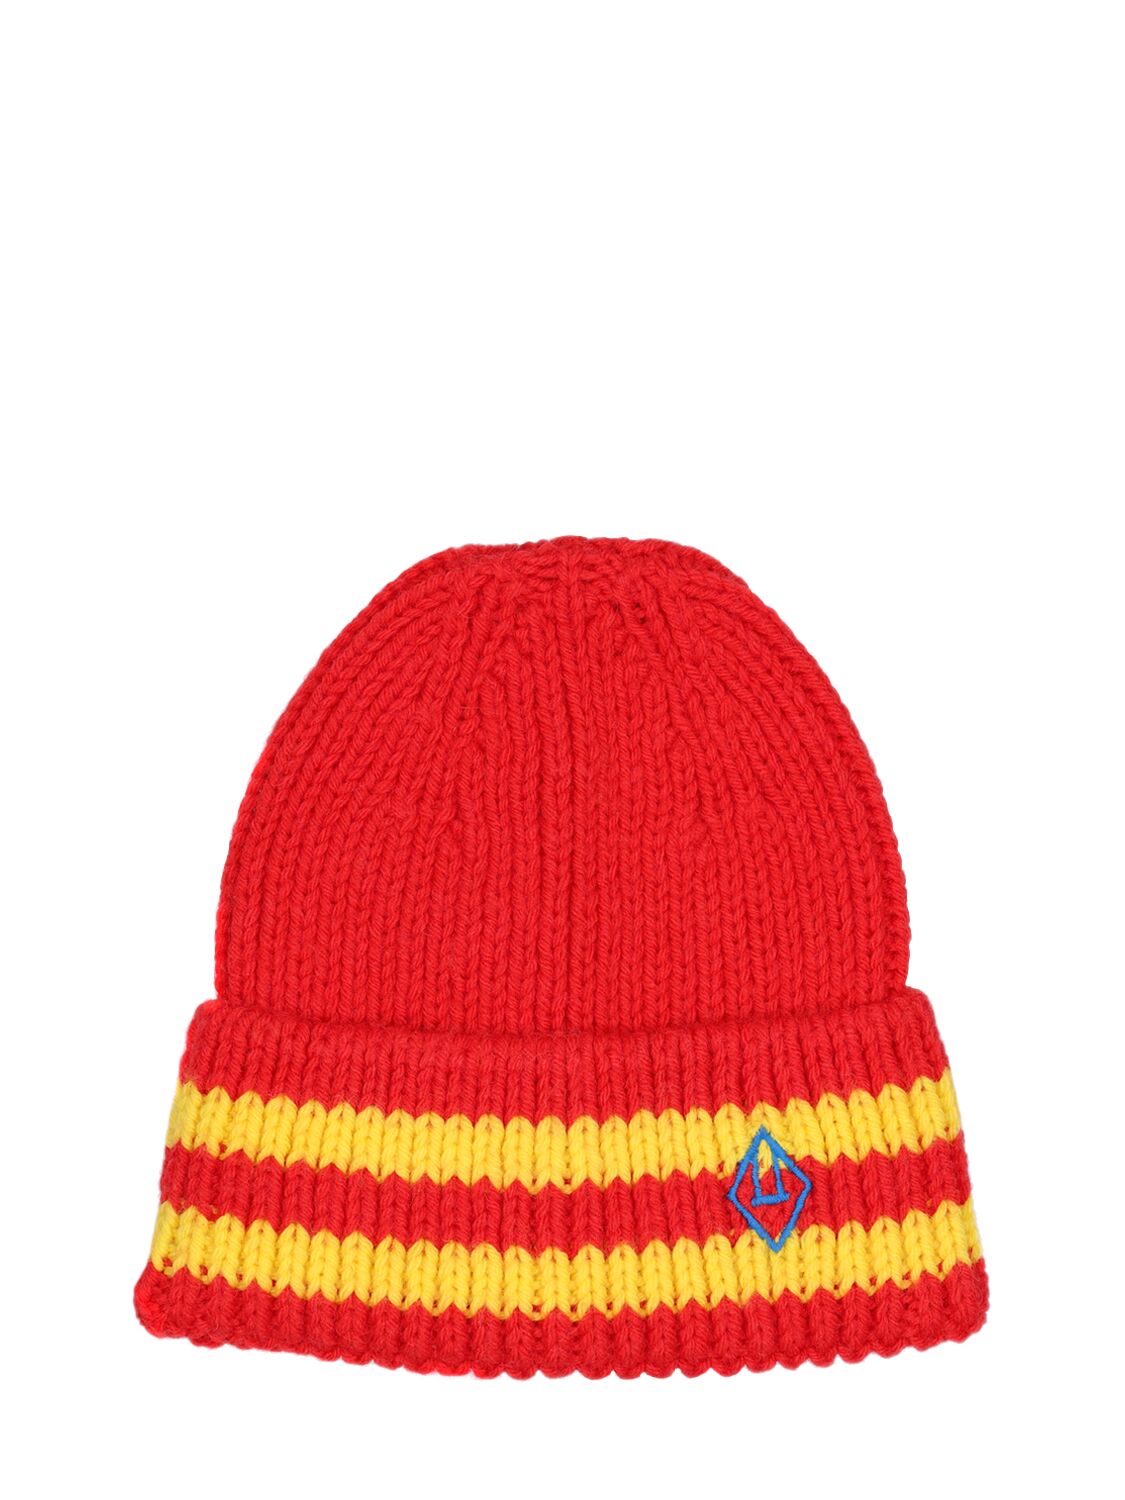 The Animals Observatory Kids' Wool Knit Beanie In Red